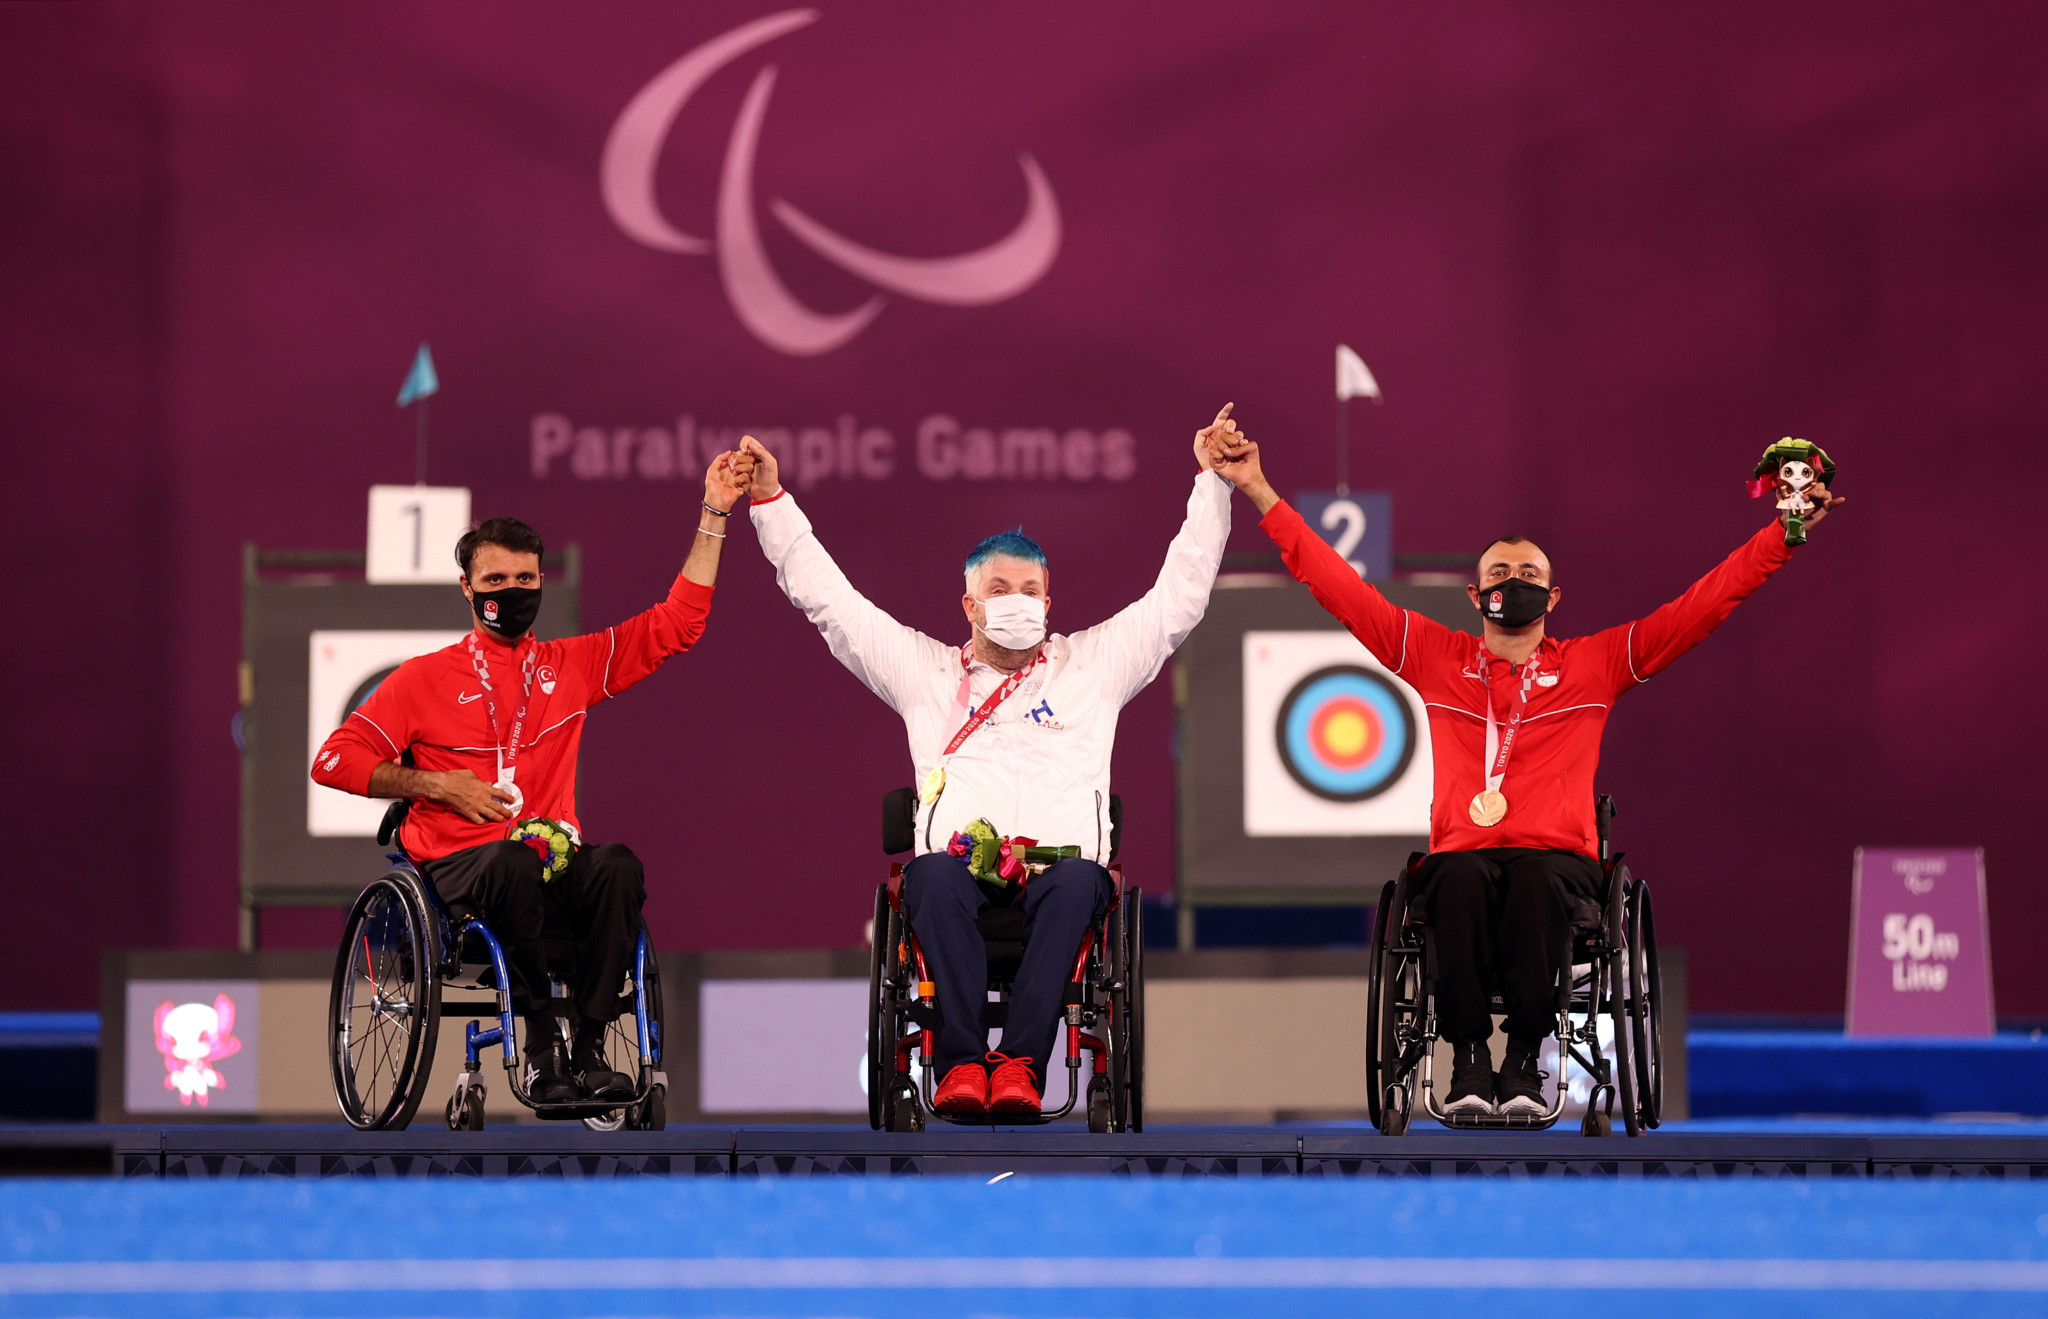 Czech Republic's David Drahonínský won his second gold medal of the Games ©Getty Images